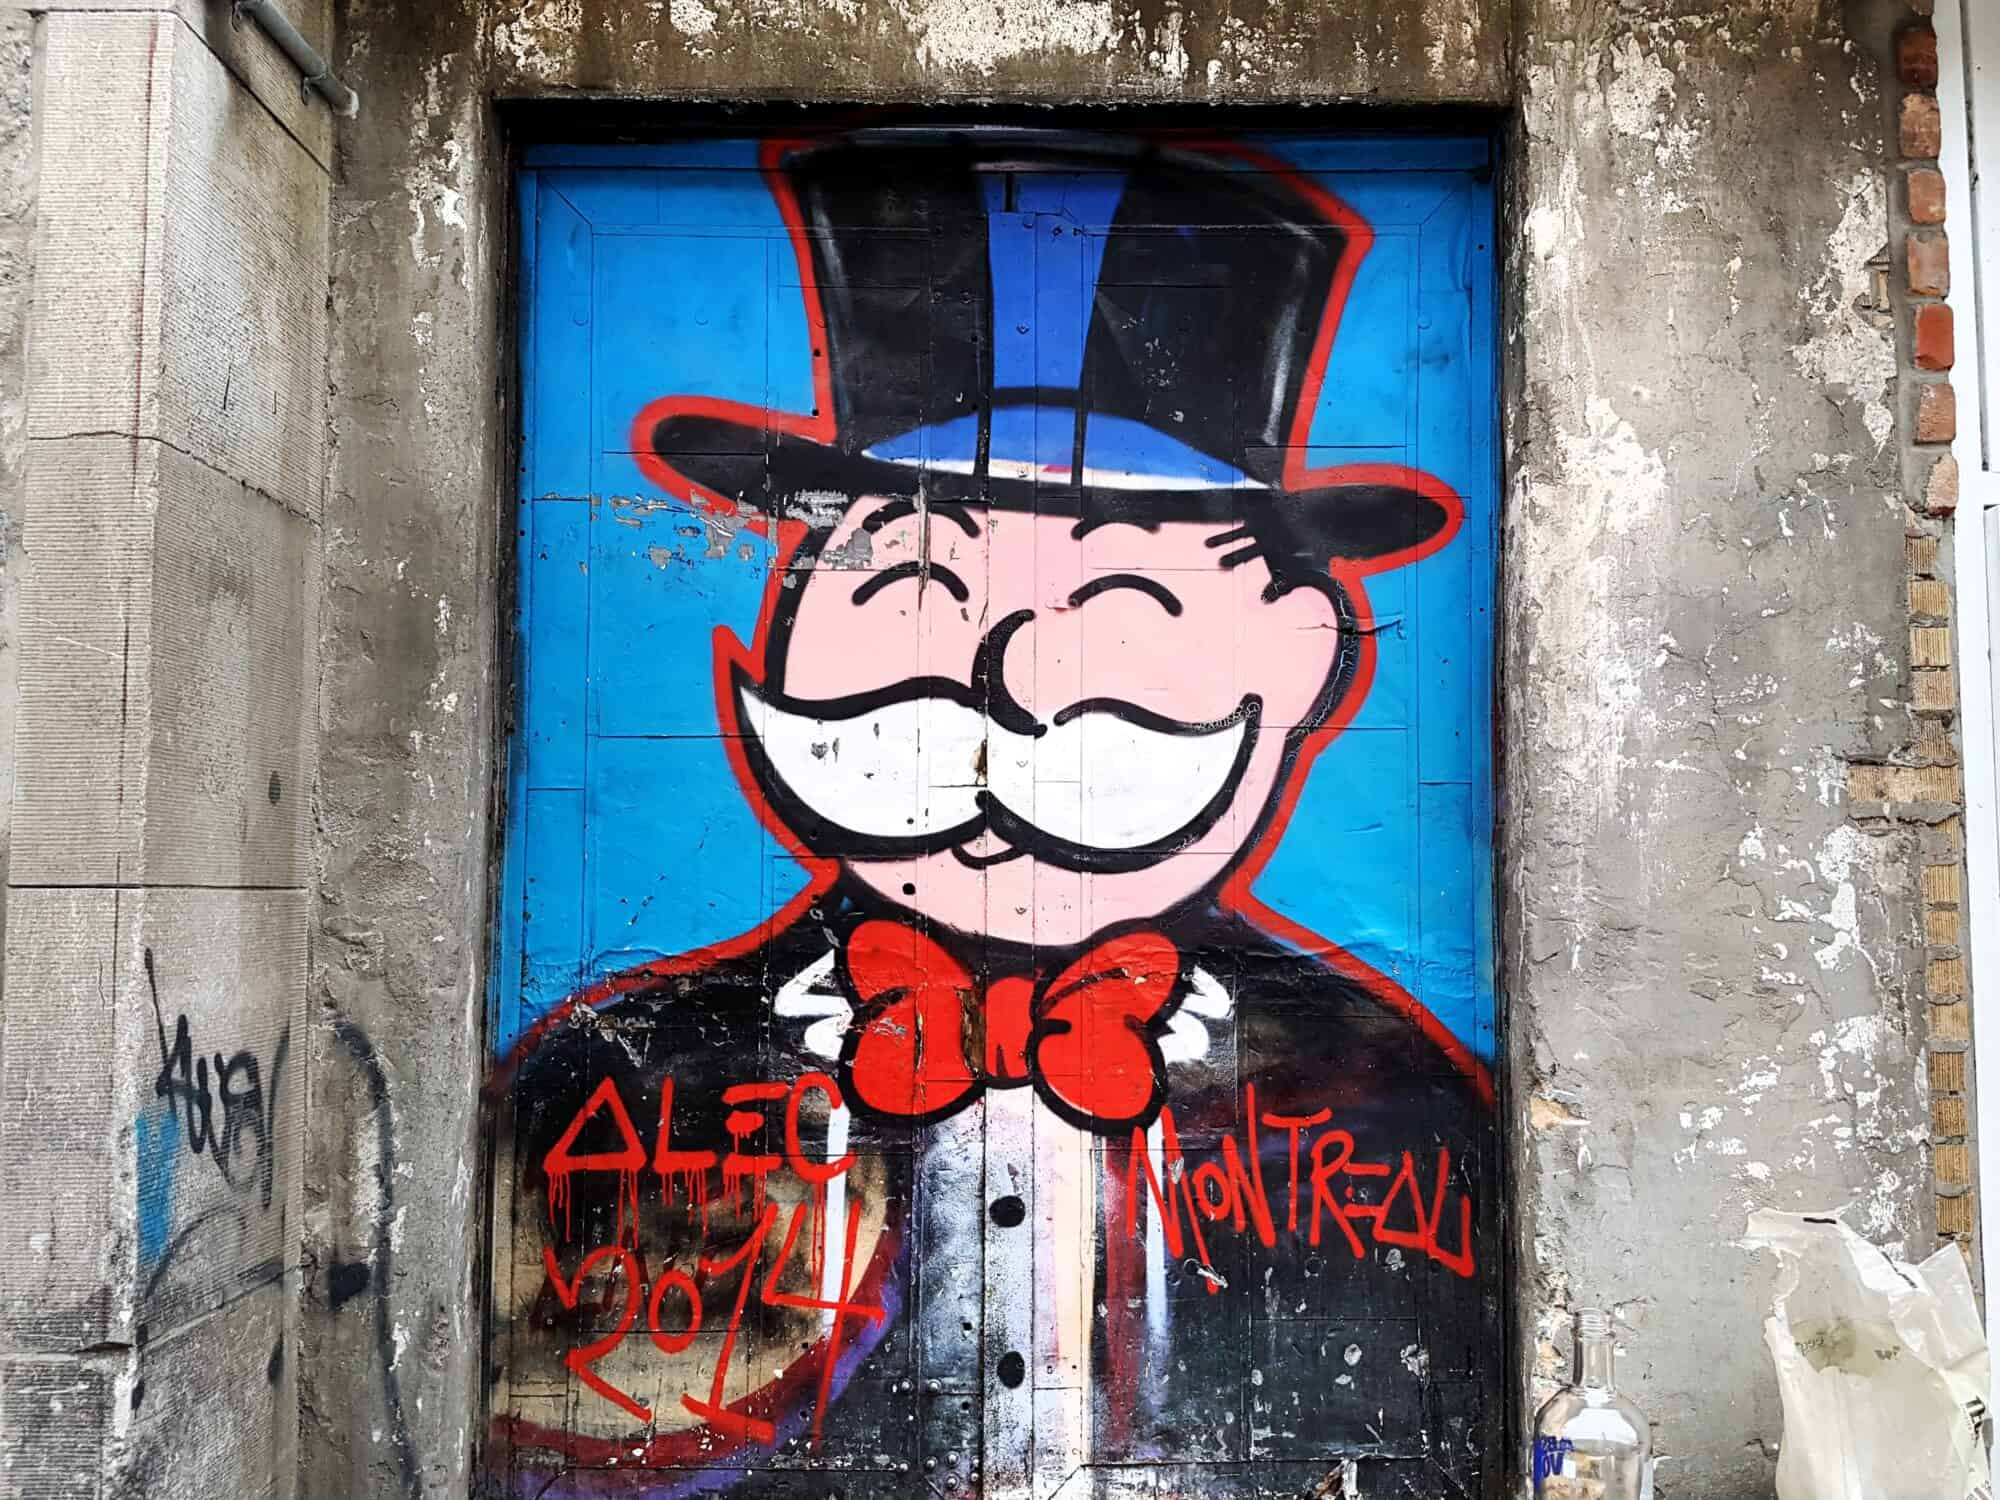 Graffiti art of the Monopoly Man caricature found in Montreal.